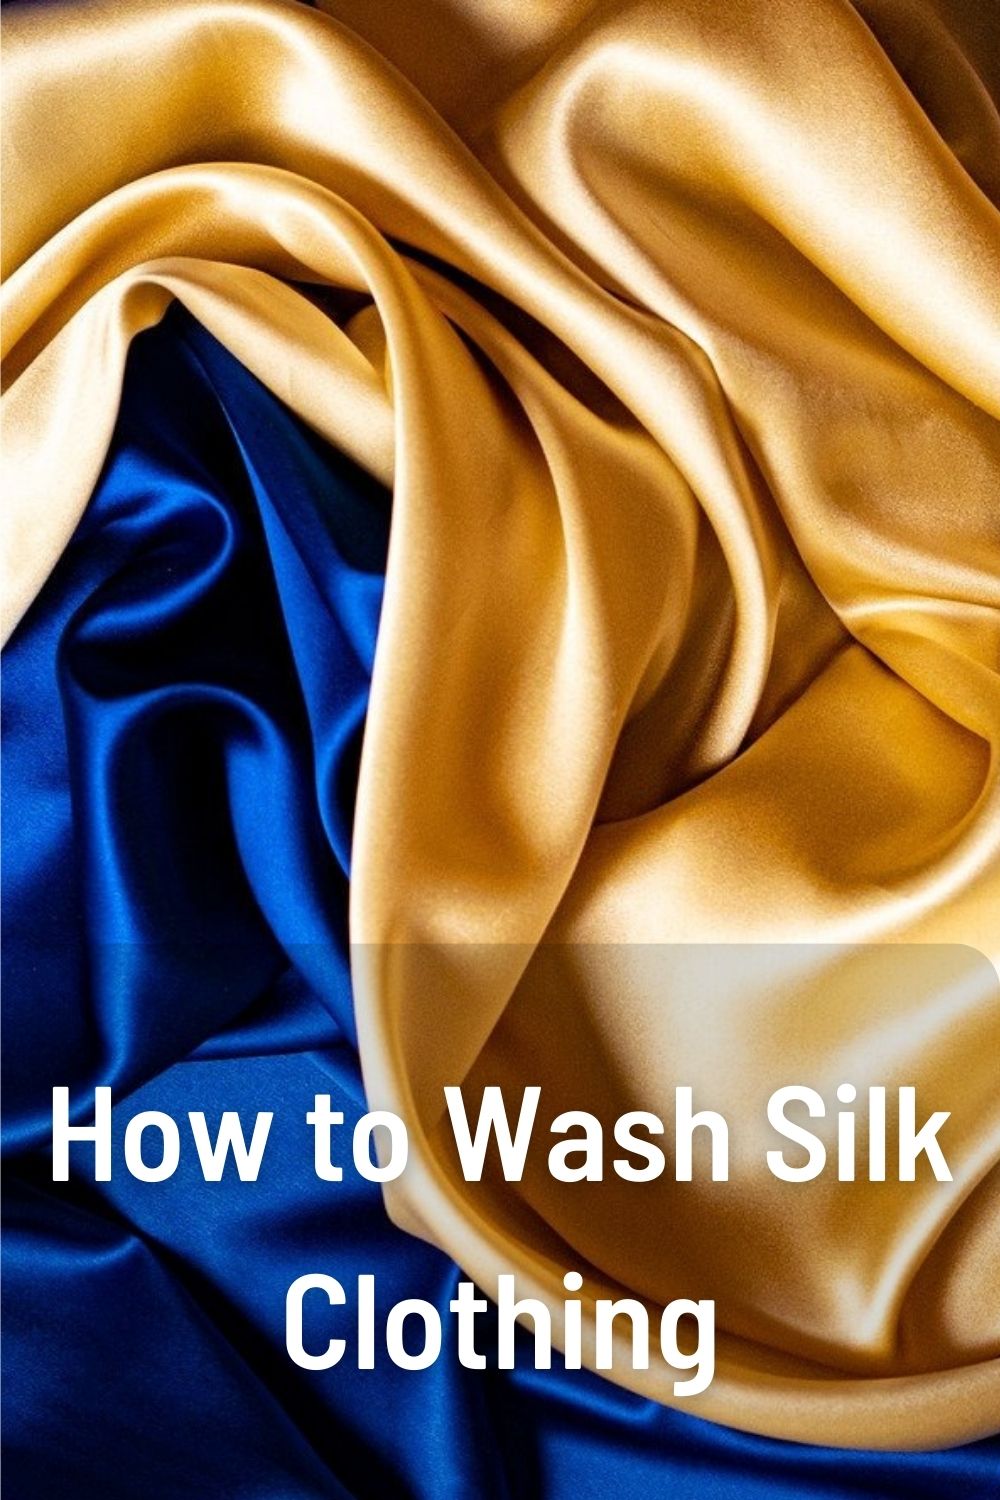 How to Wash Silk Clothing